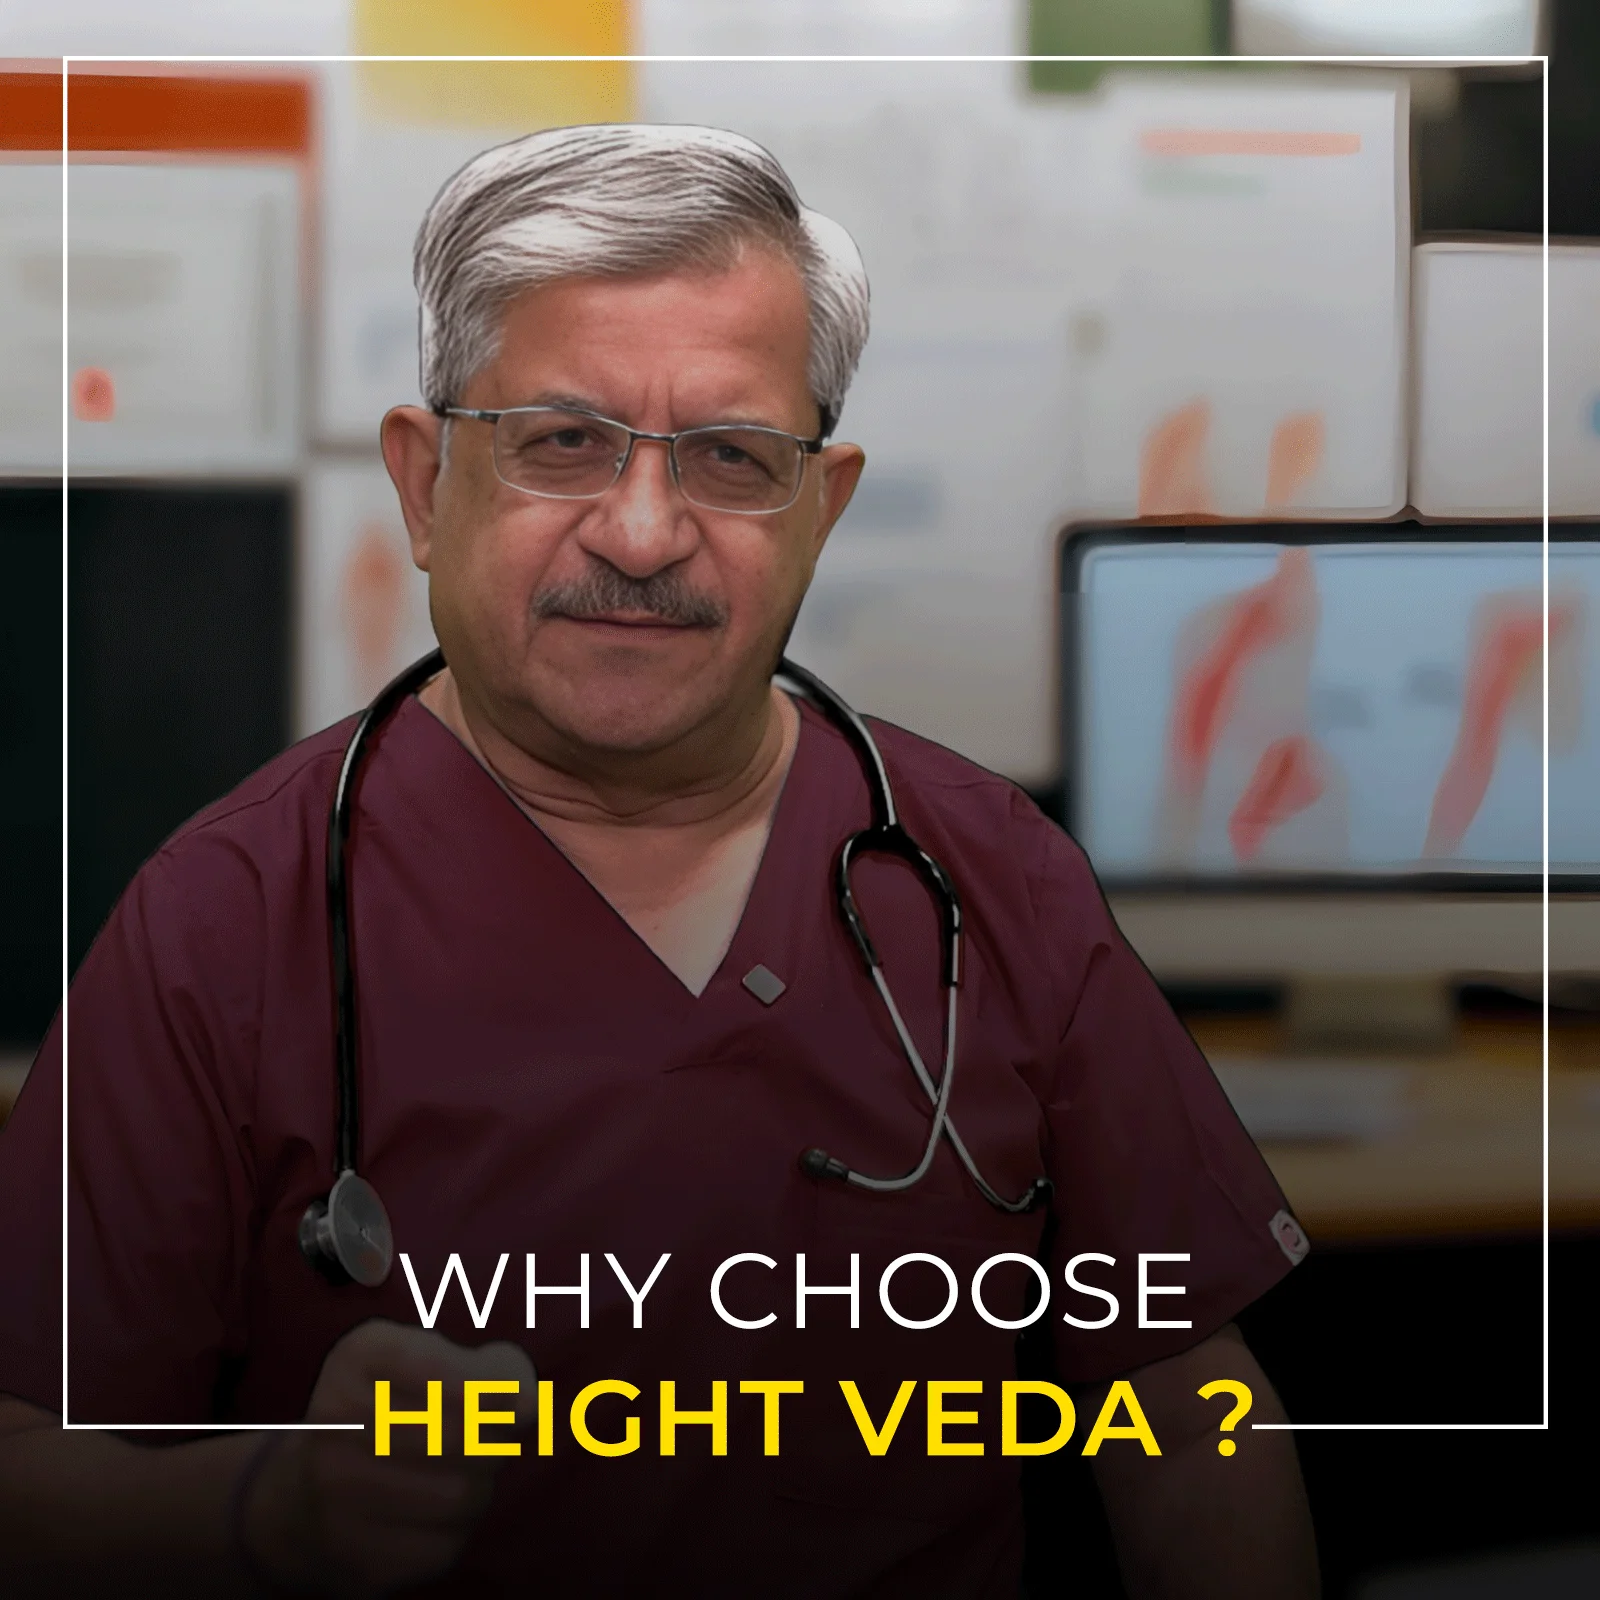 Height Veda Recommended By Doctors